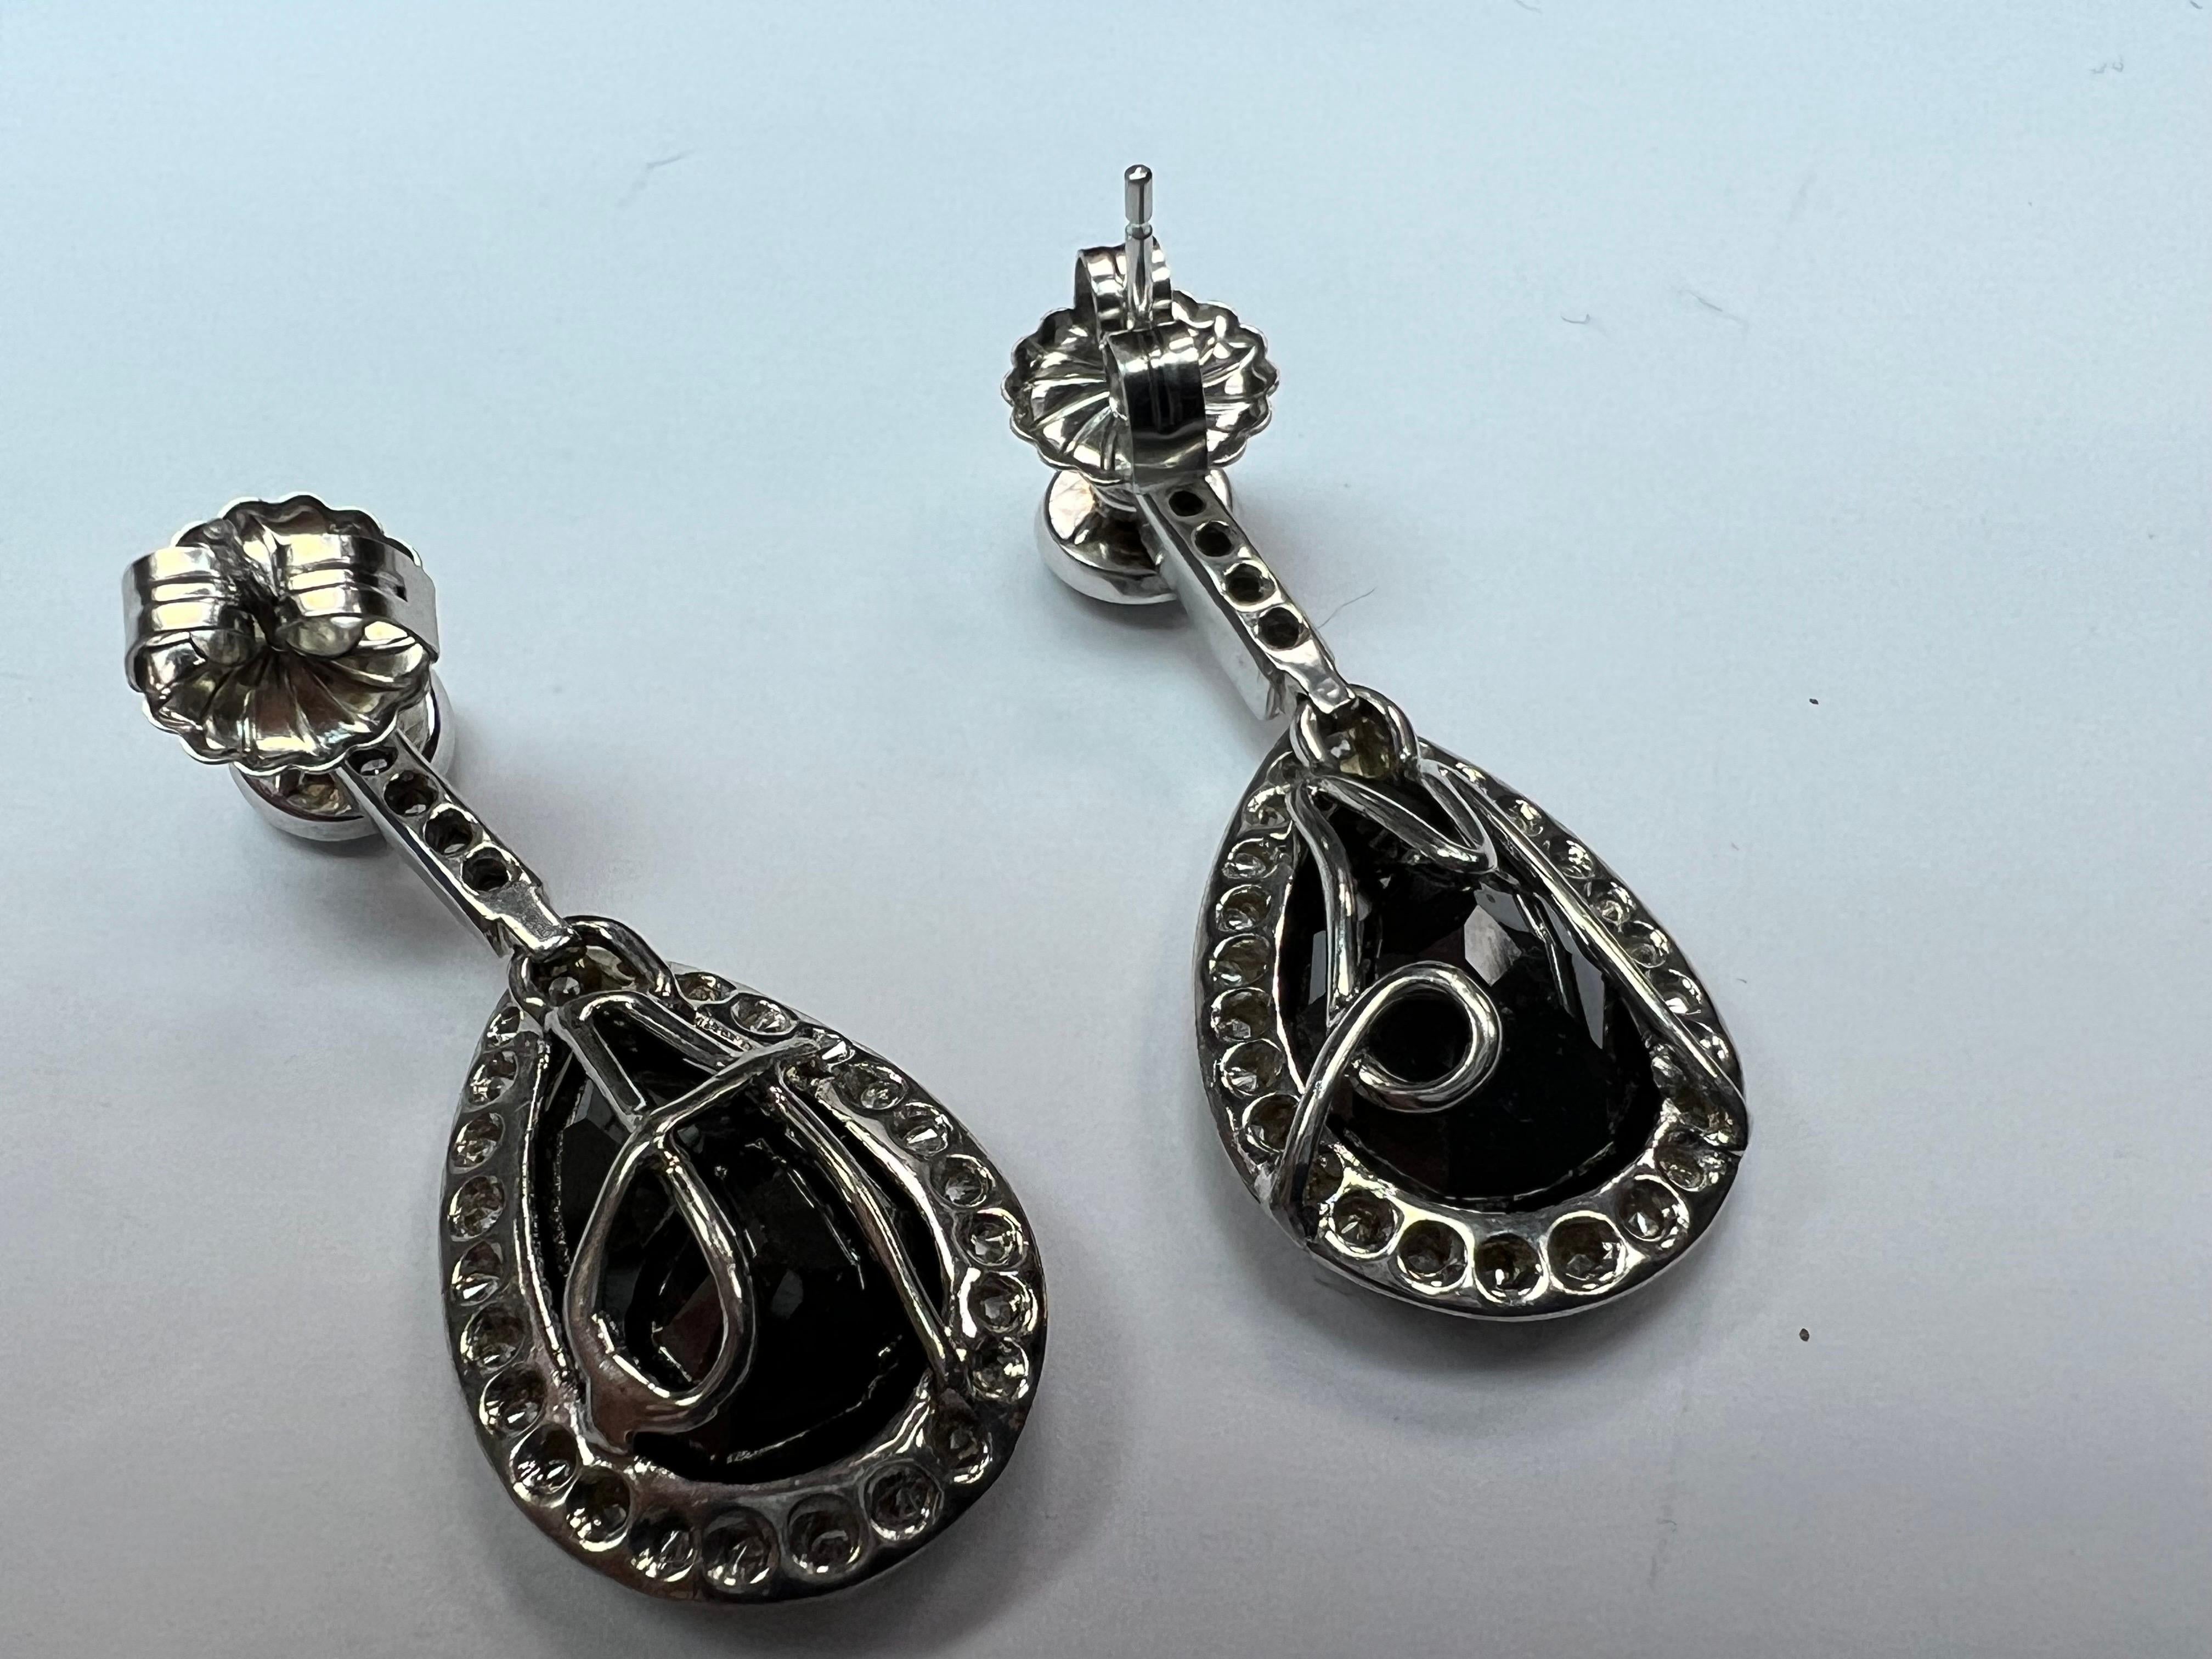 Modern Gold 23 Carat Natural Colorless and Black Pear Shaped Diamond Earrings In Good Condition For Sale In Los Angeles, CA